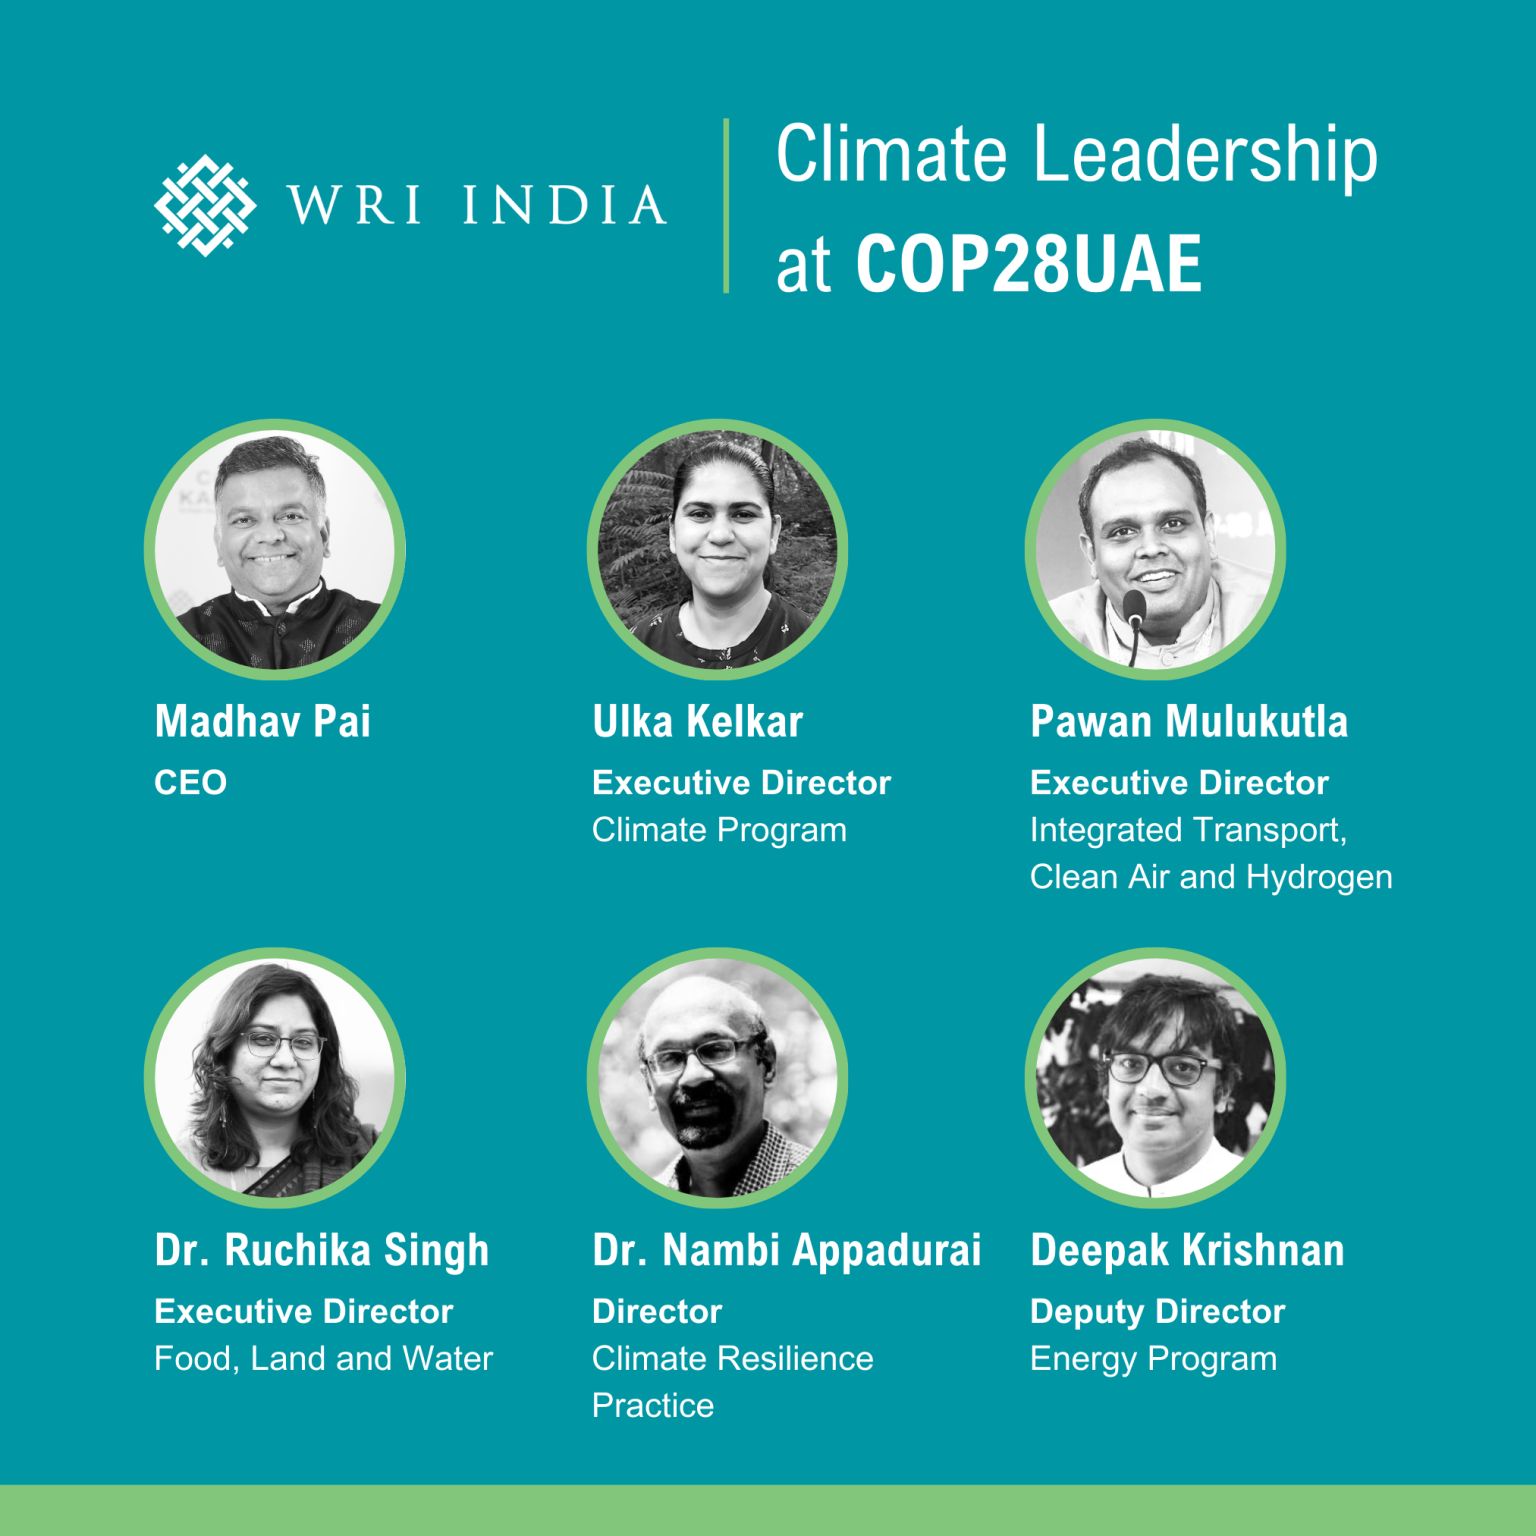 Experts and climate leaders from WRI India are at COP28 in UAE